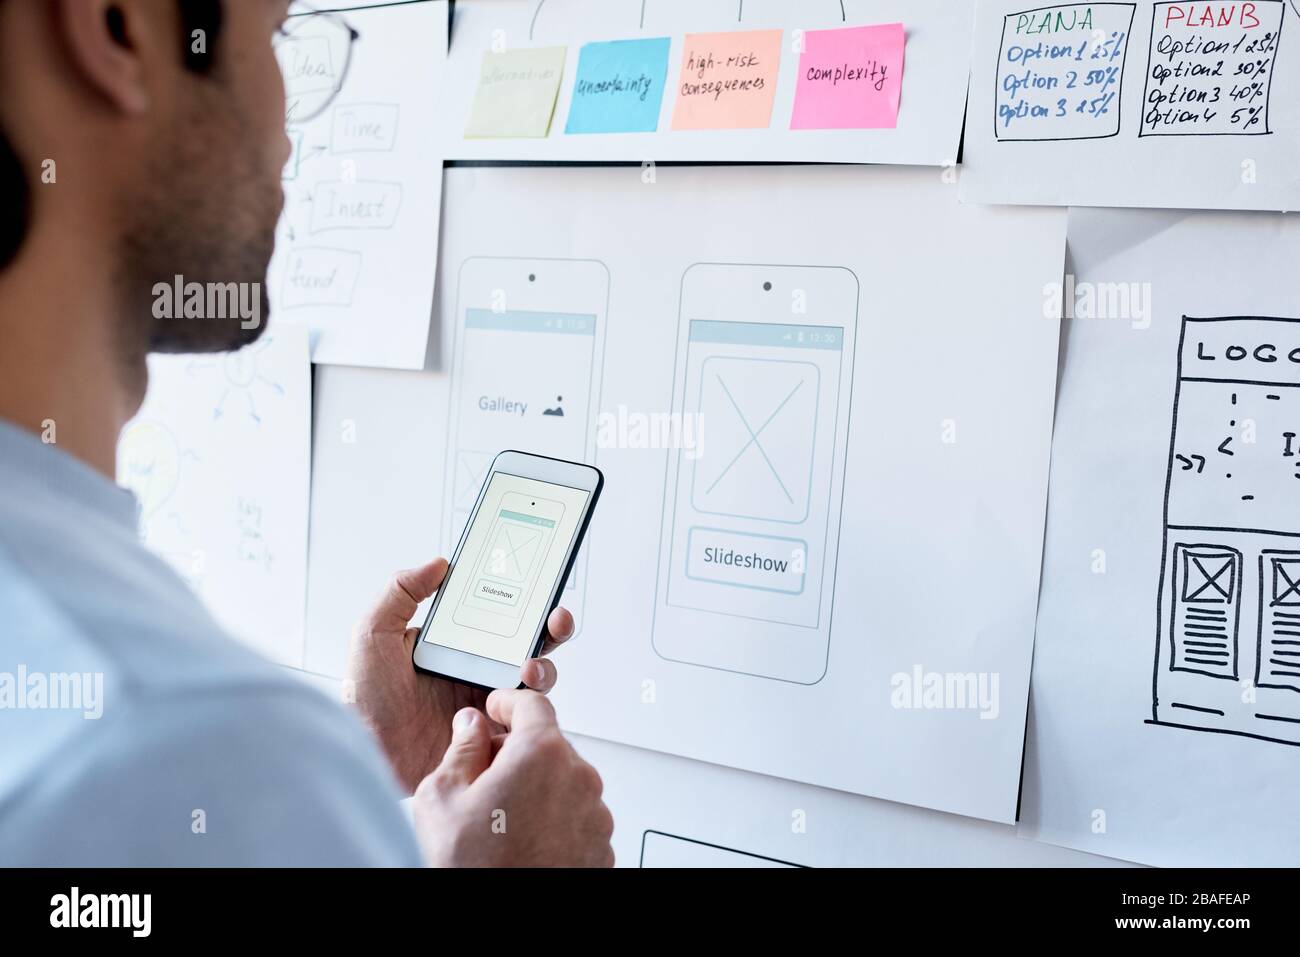 Over shoulder view of man using smartphone while designing slideshow effect in office with task board Stock Photo